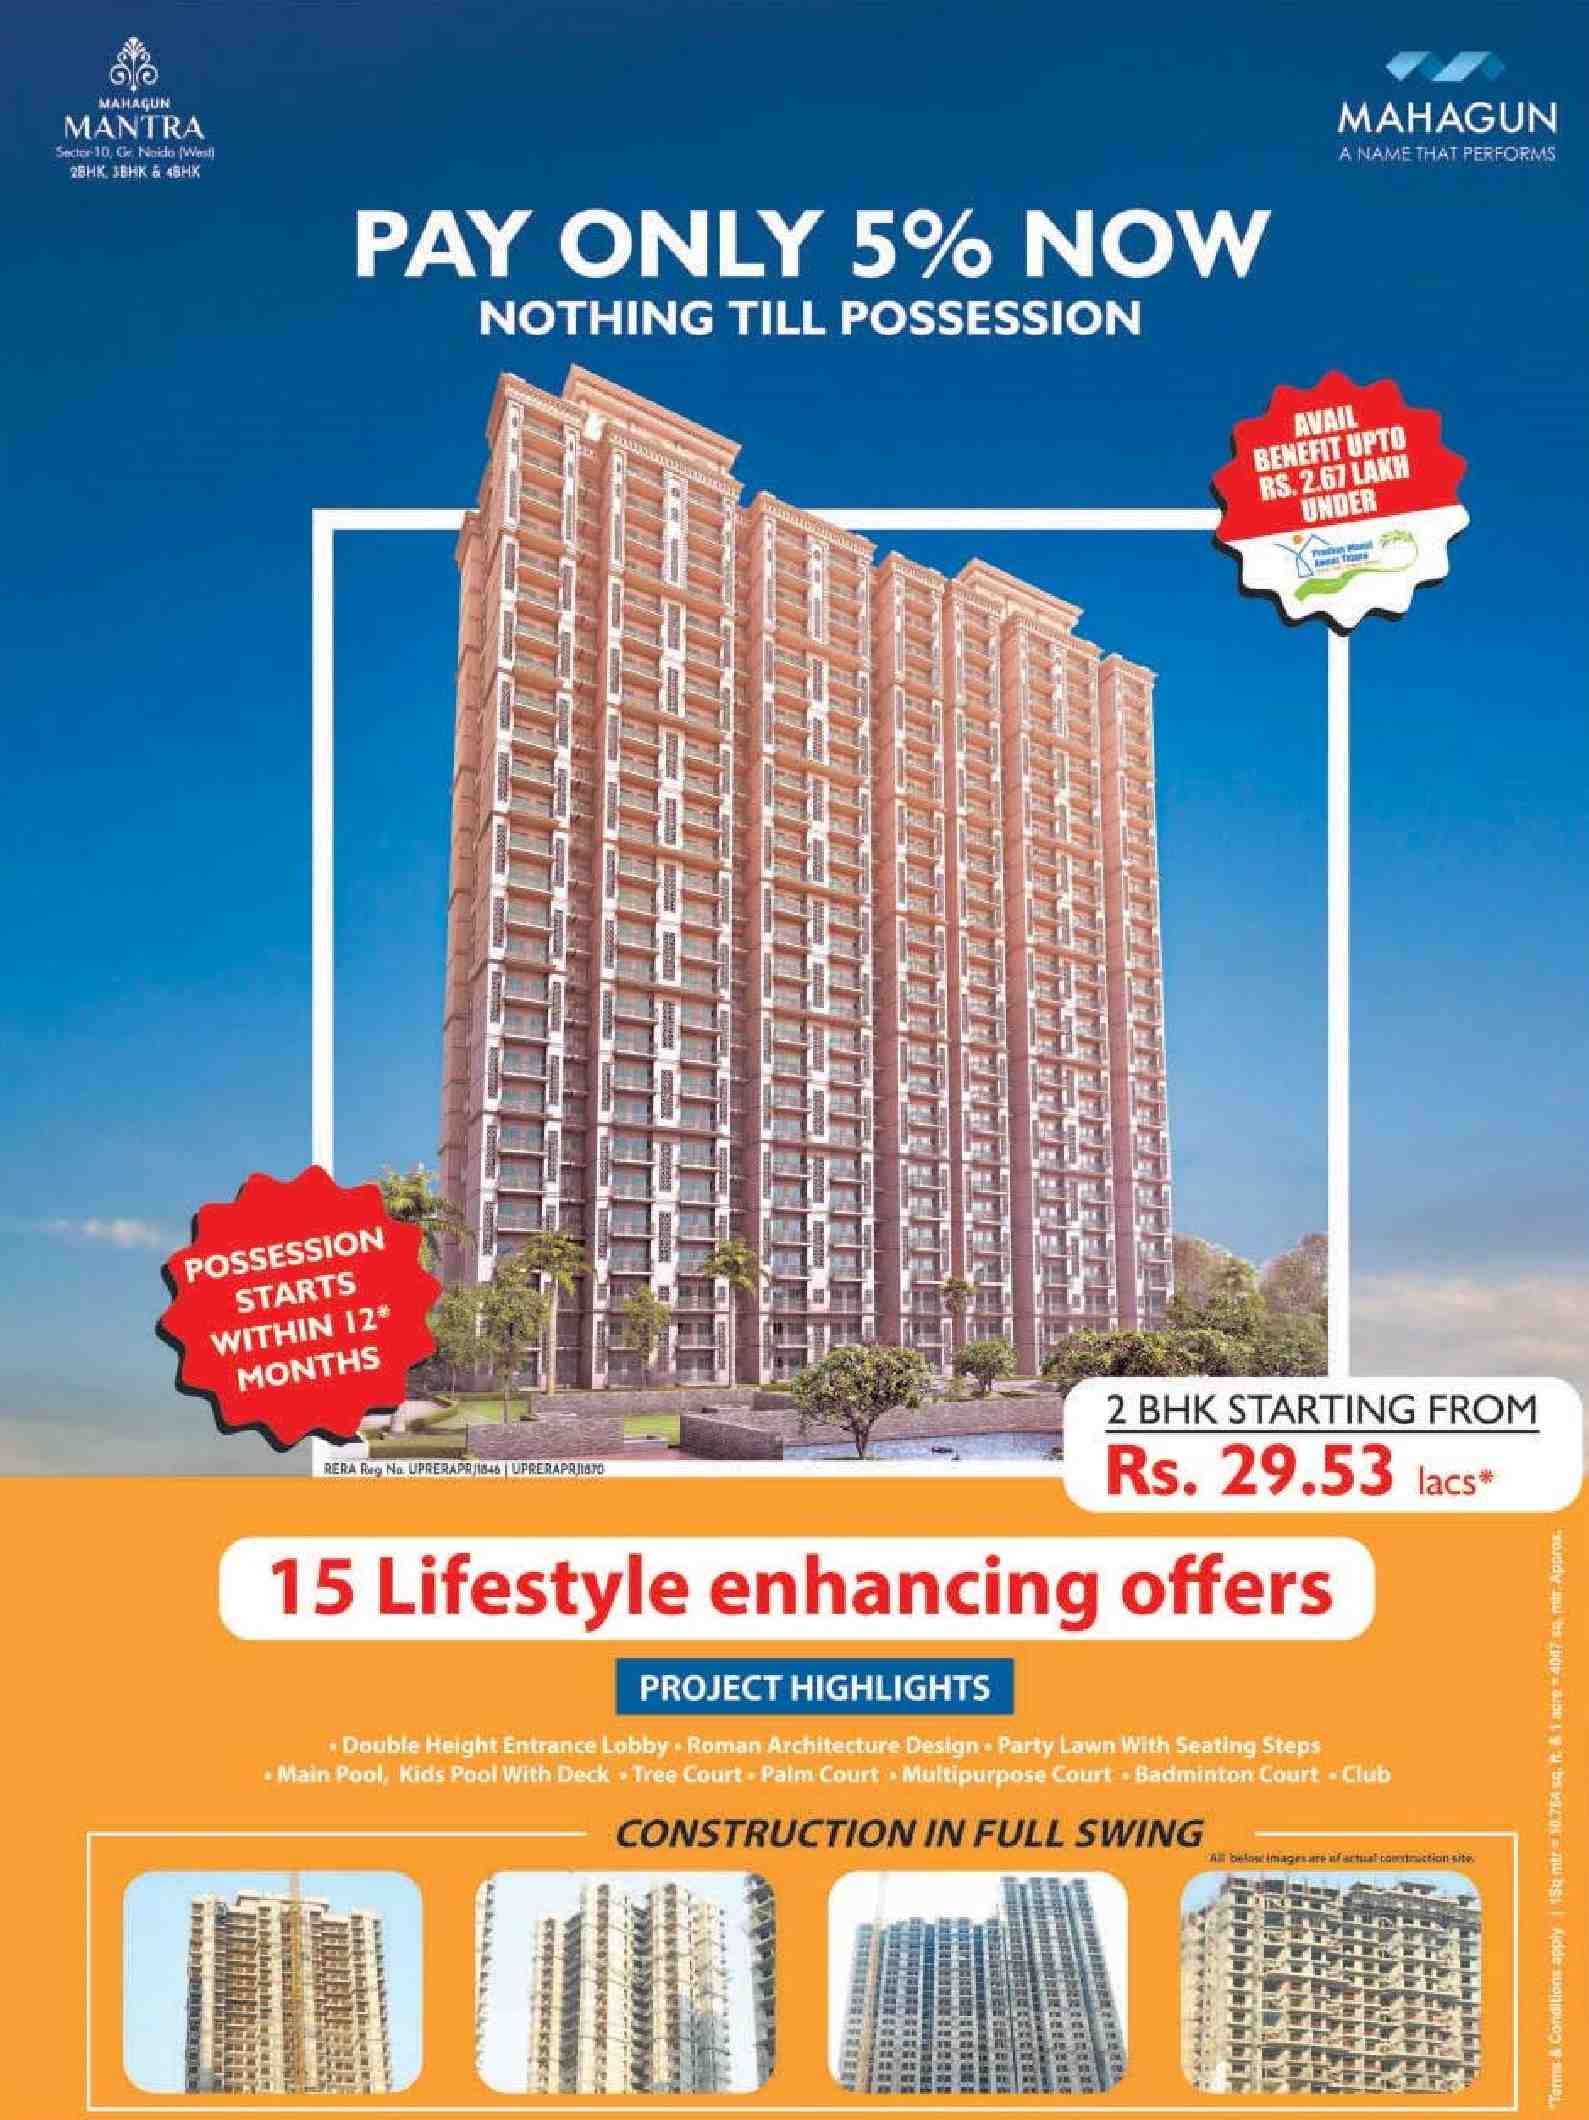 Pay only 5% now & nothing till possession at Mahagun Mantra in Sector 10, Greater Noida